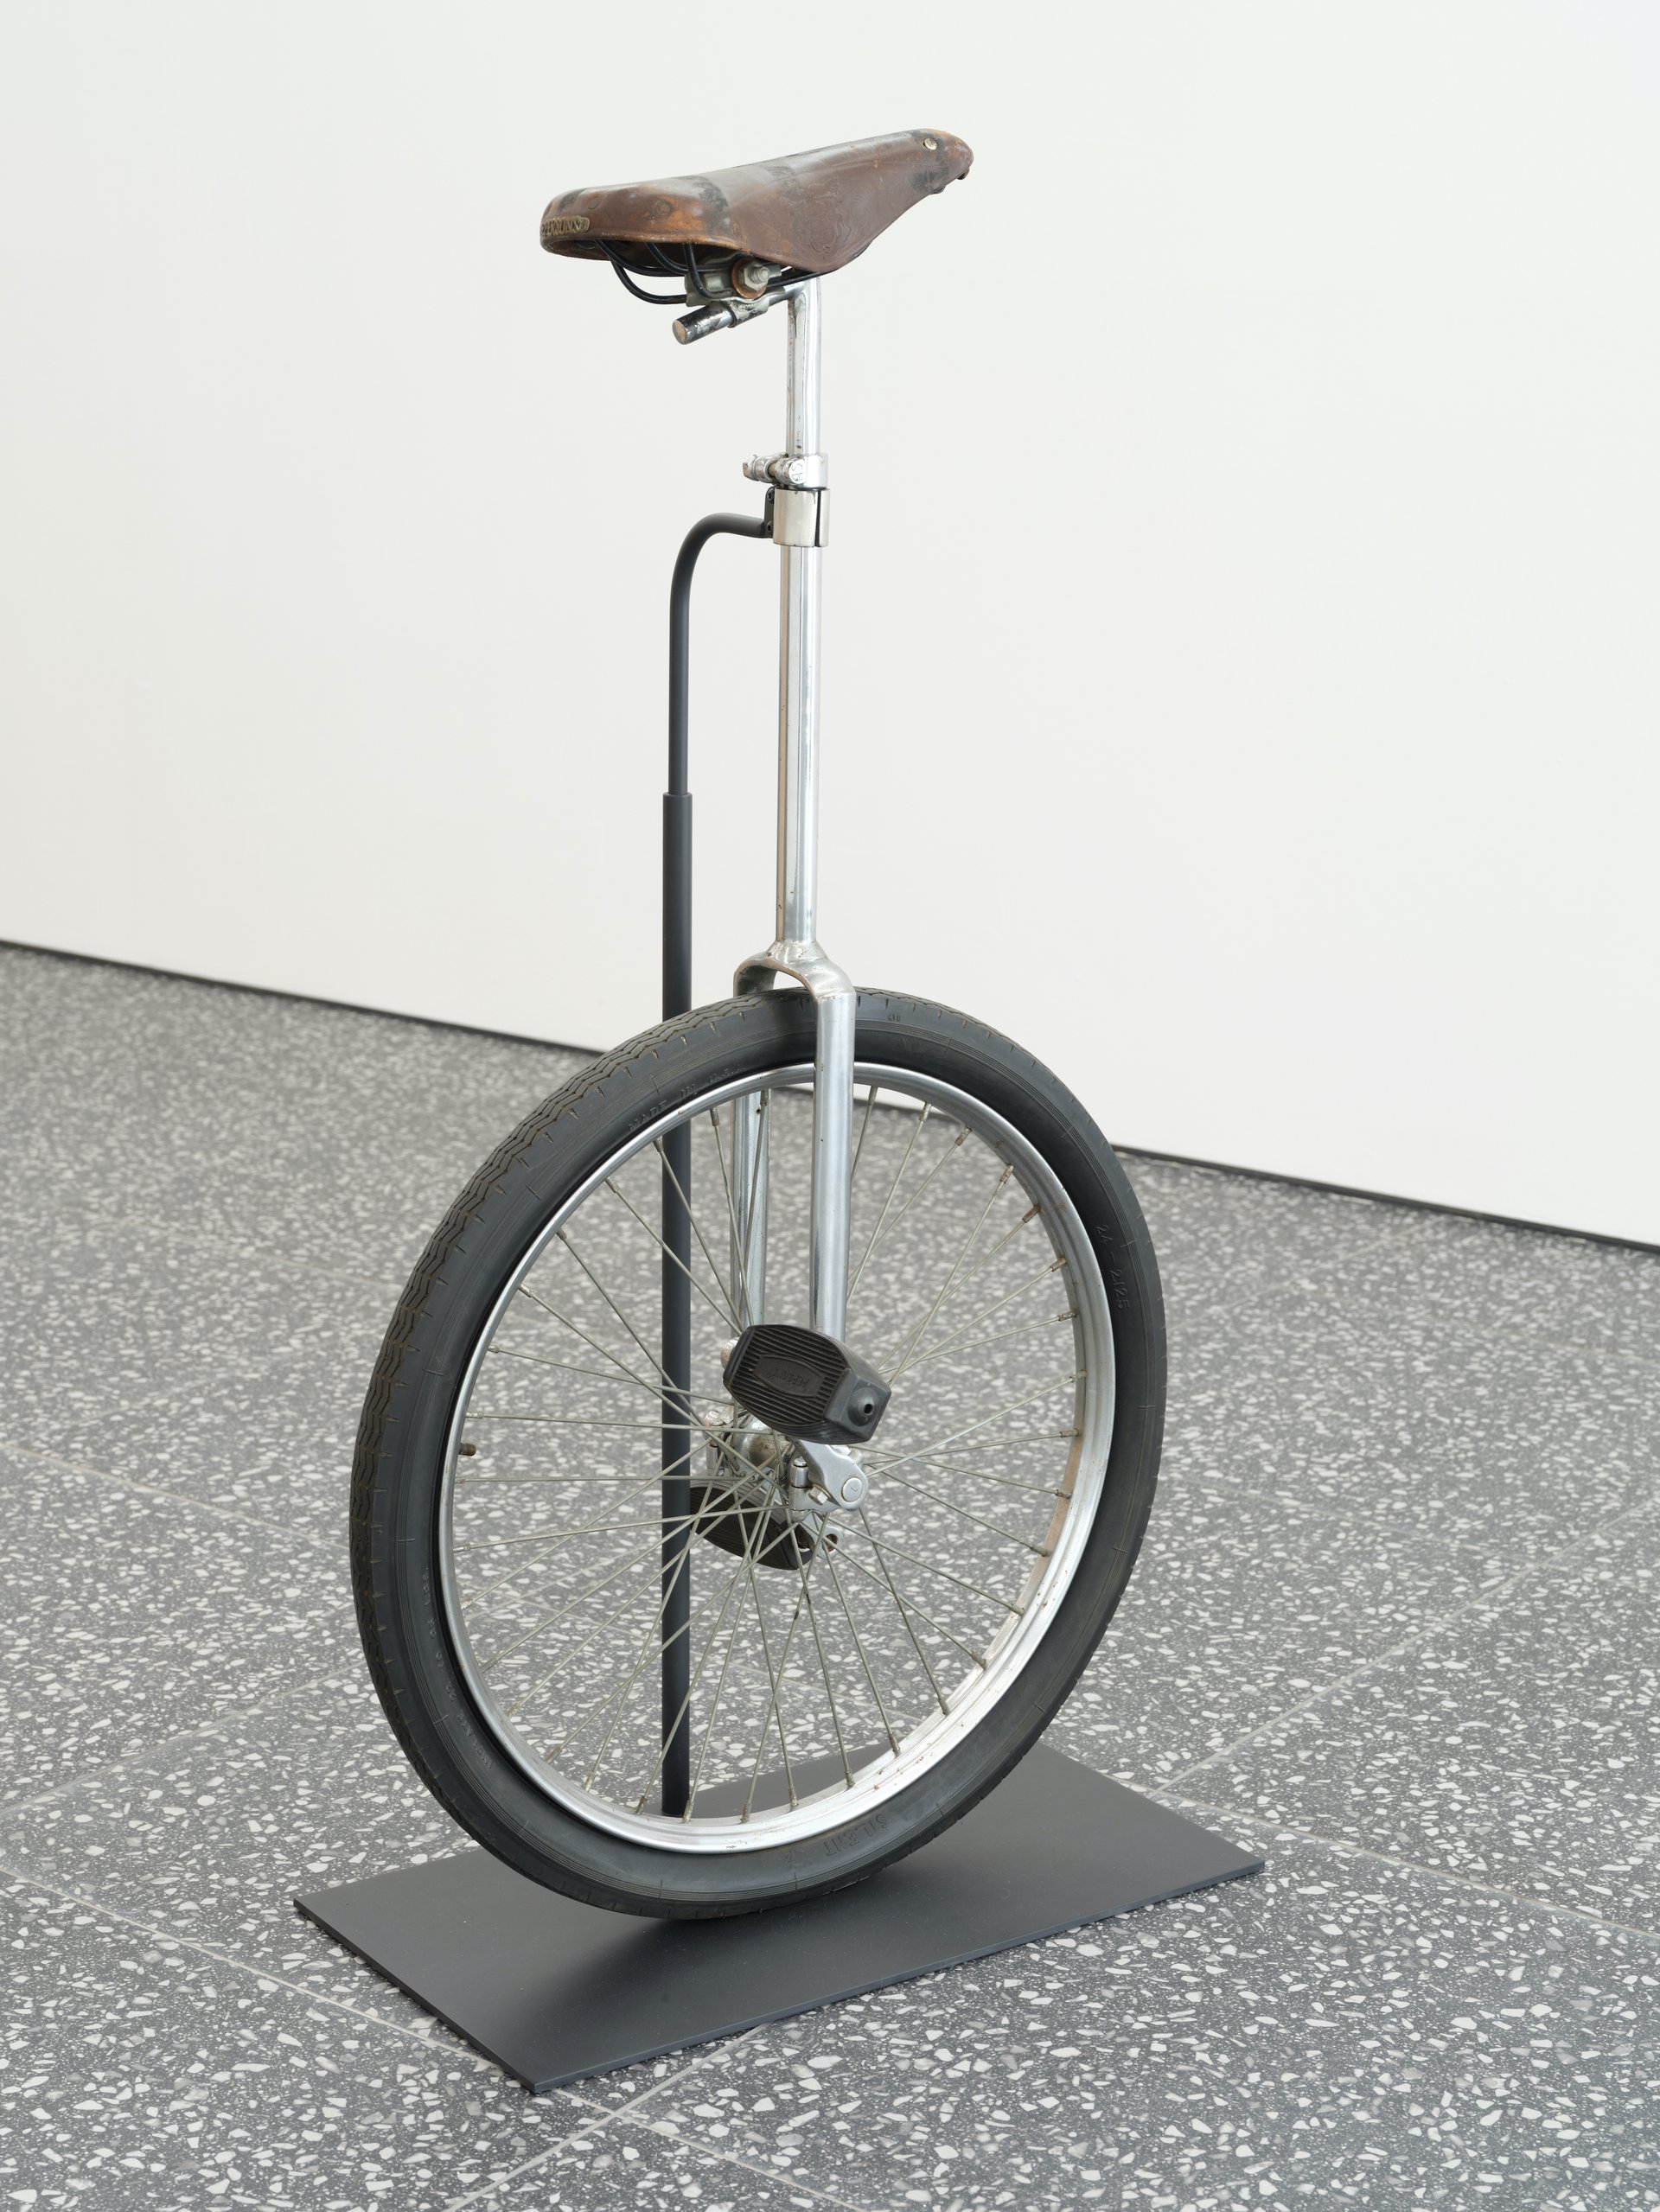 Installation view, Gaylen Gerber, Support, n.d. unicycle from entertainer Ray Royce’s nightclub and television act, Persons Majestic Manufacturing Company, United States, mid-20th century, on base, 112.3 x 61 x 43 cm (44¼ x 24 x 17 inches)